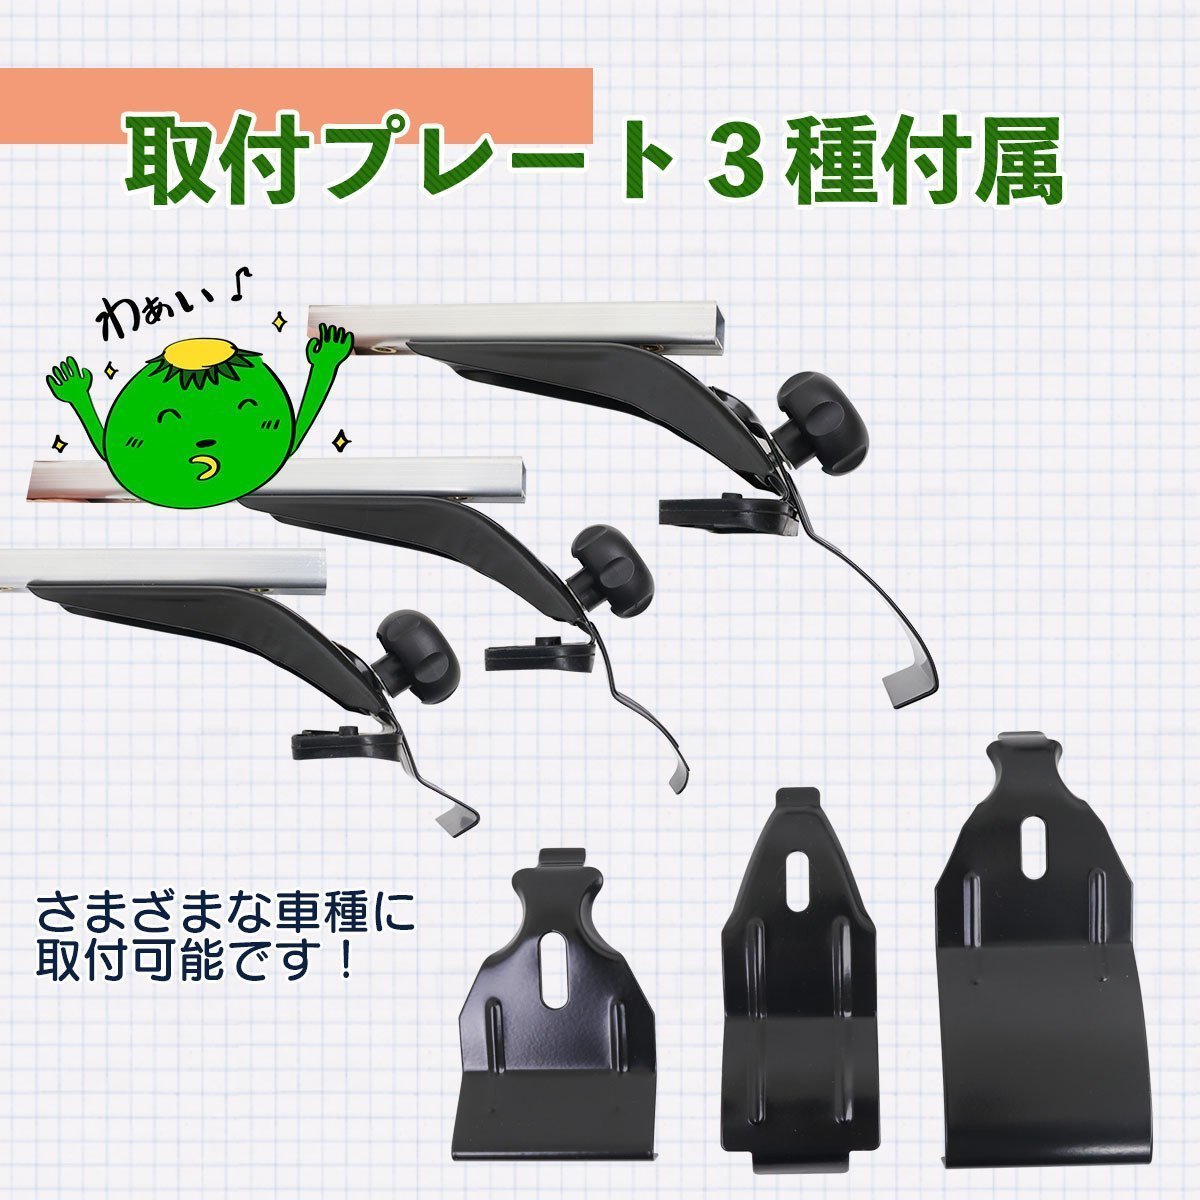 [ free shipping ] all-purpose 2 pcs set * aluminium base carrier * roof carrier installation car supplies roof rack width 120cm width adjustment possibility!